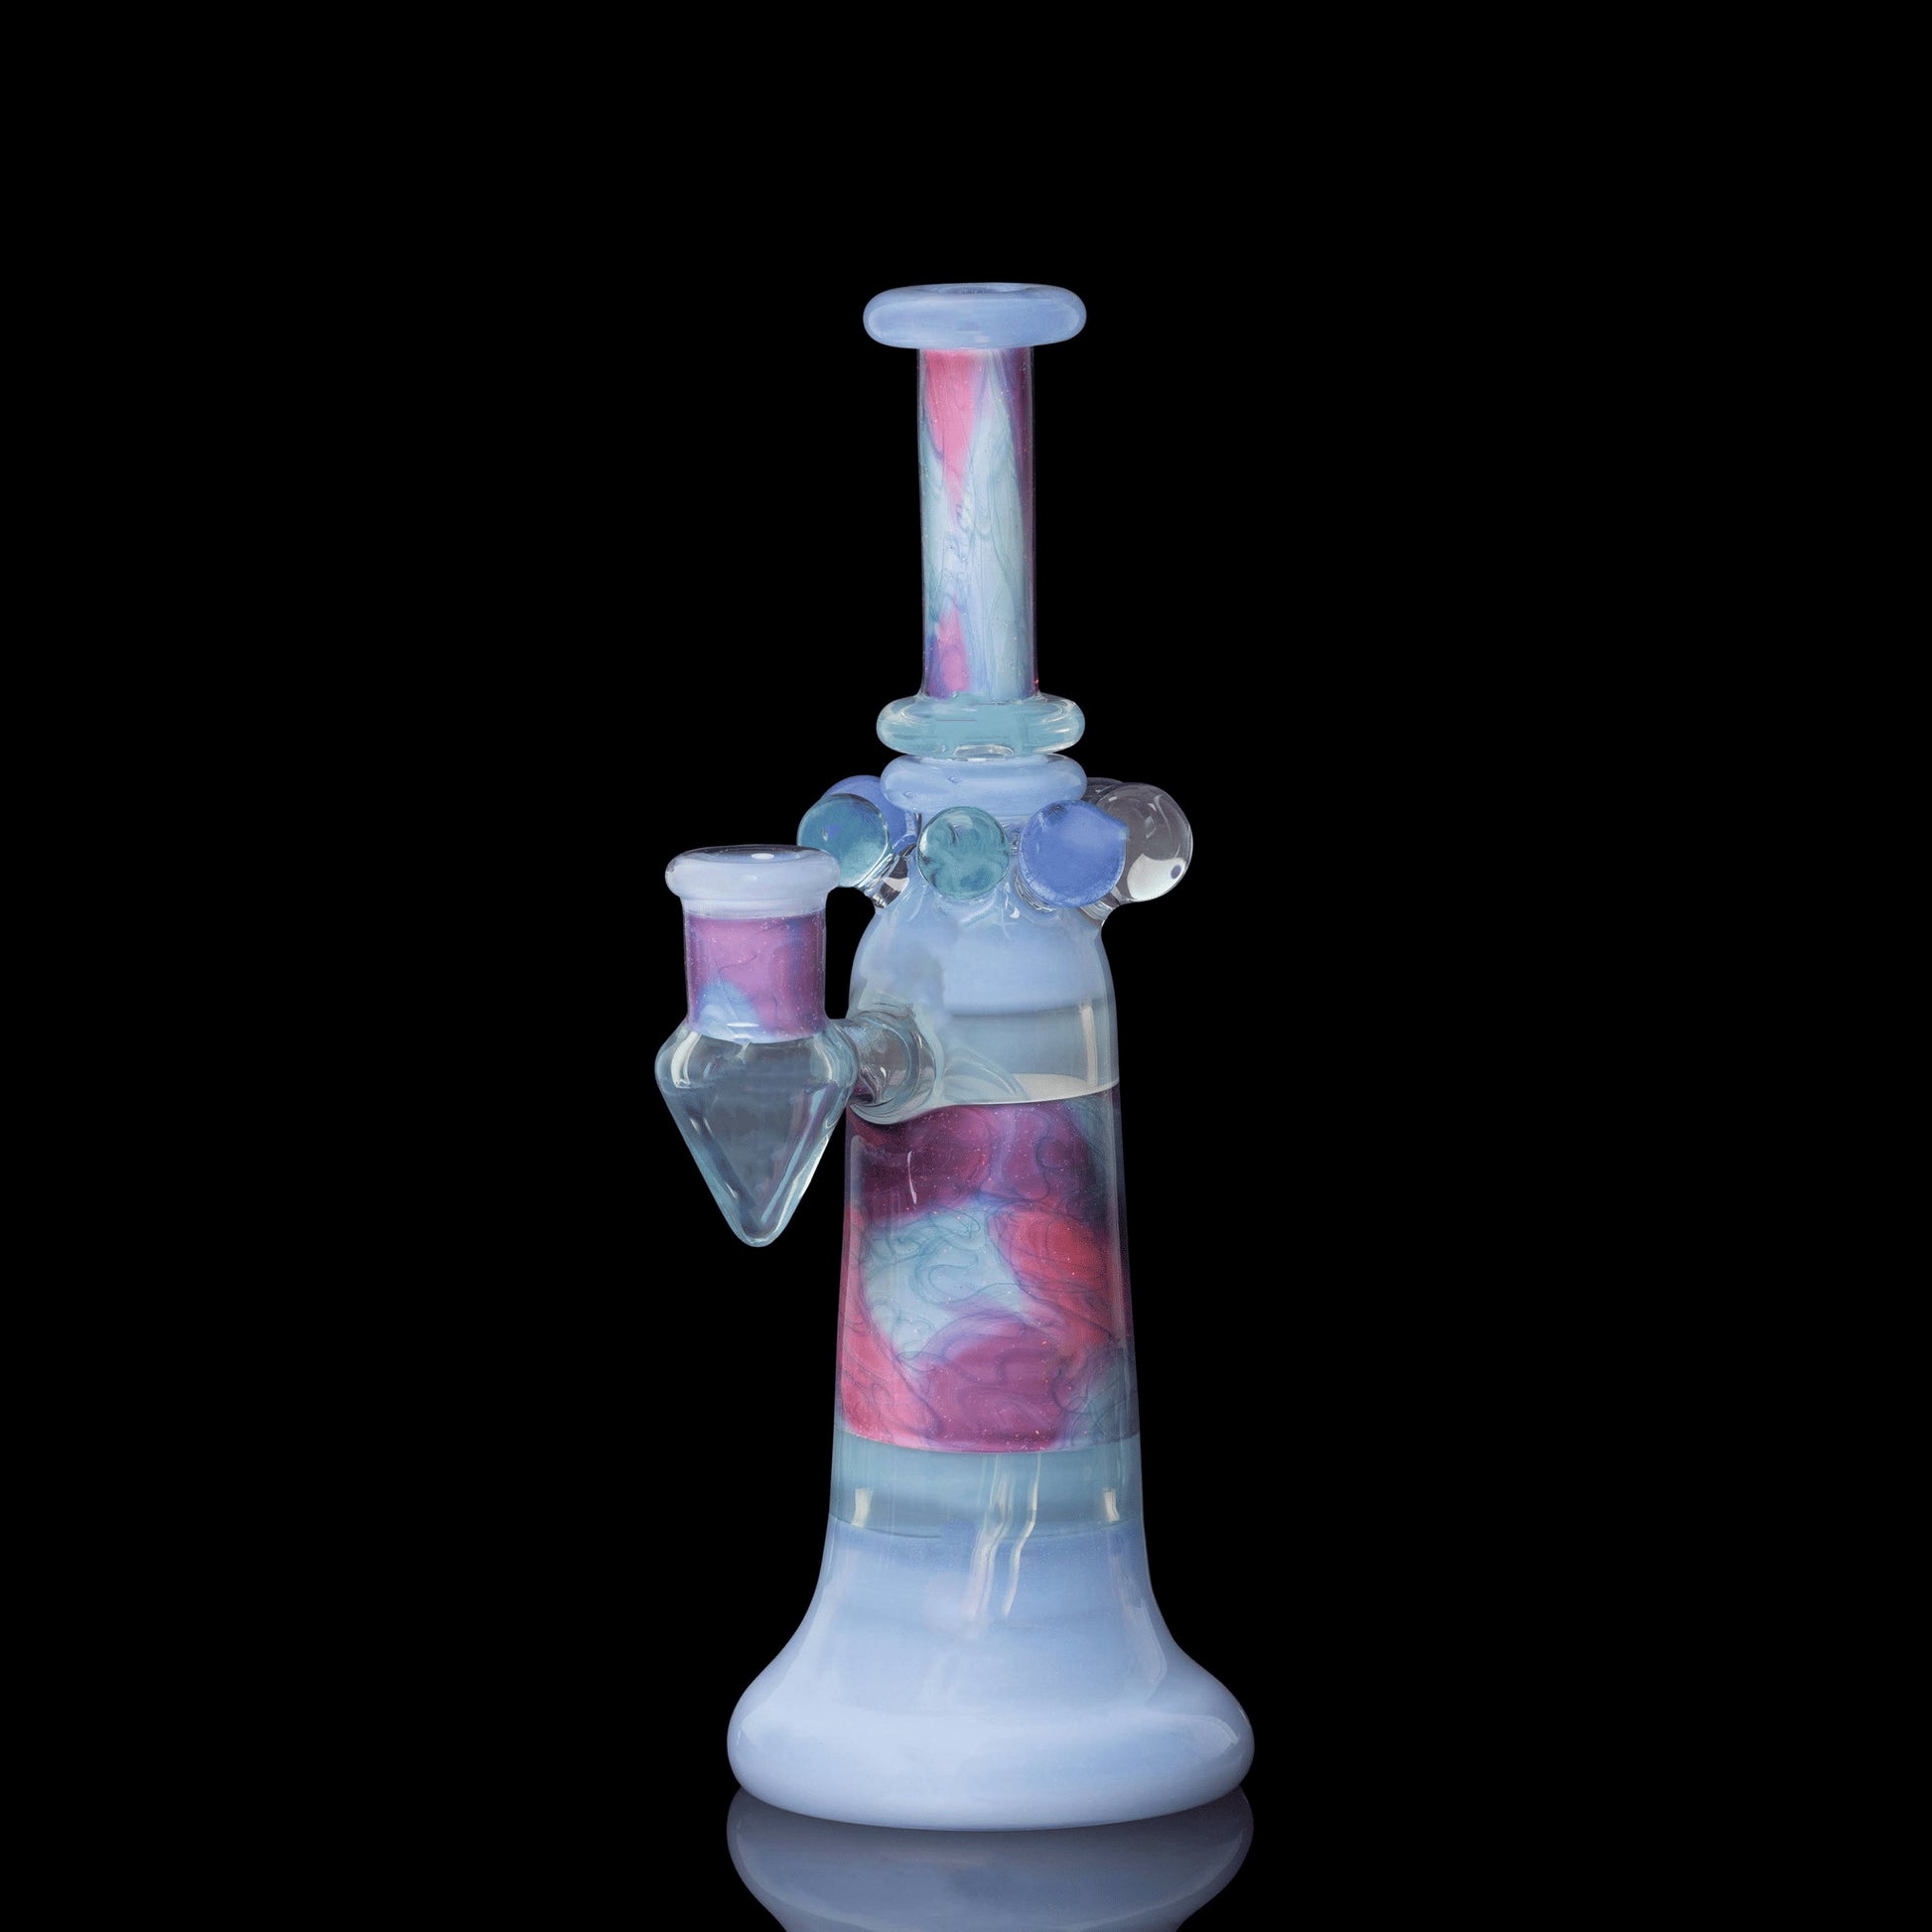 luxurious design of the Collab Her Rig by Kyle White x Scomo Moanet (Scribble Season 2022)